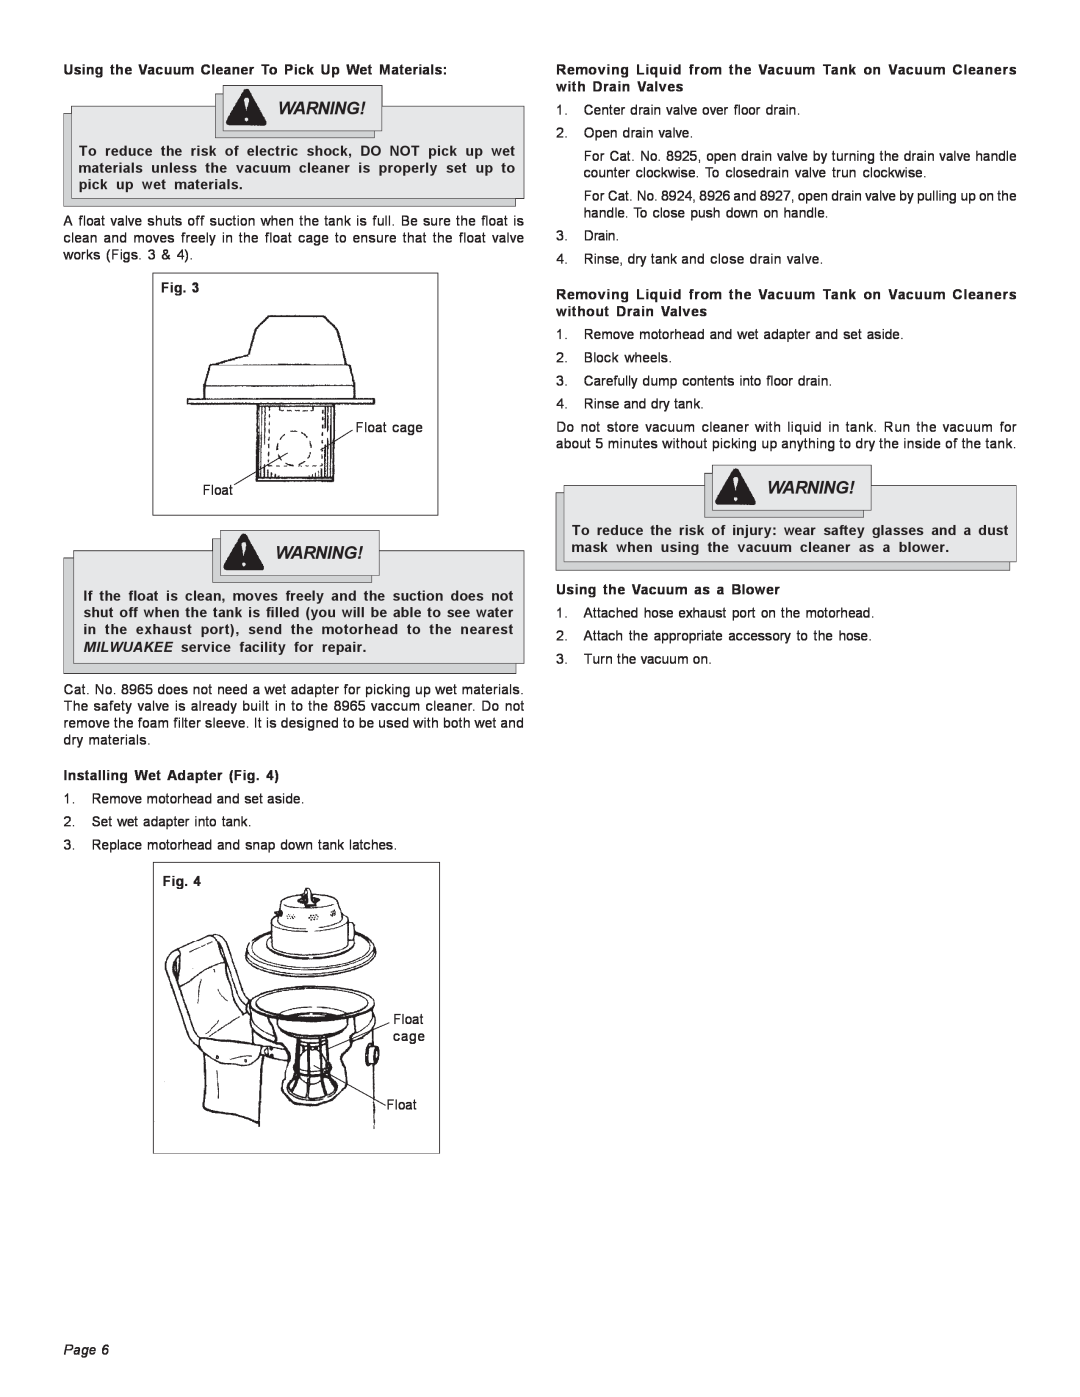 Milwaukee Heavy-Duty Commercial Vacuum manual Using the Vacuum Cleaner To Pick Up Wet Materials, Page 